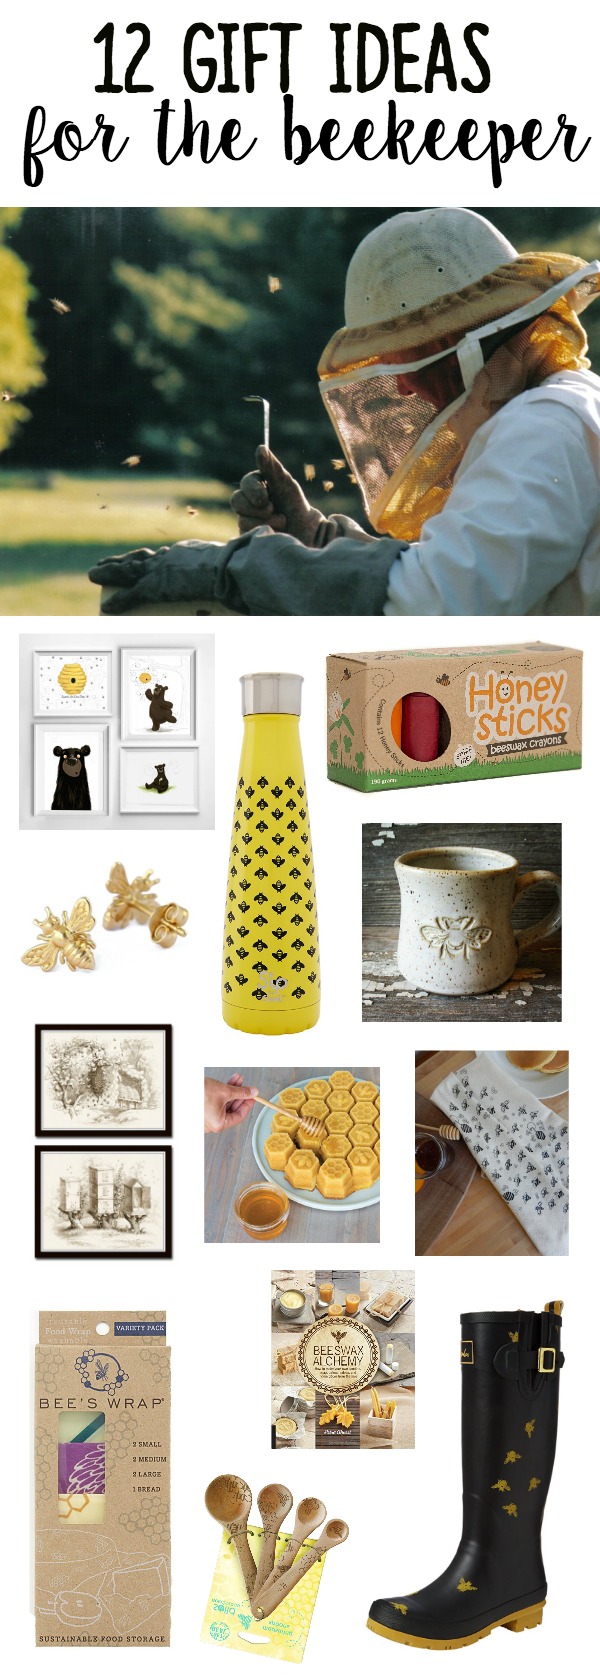 12 Gifts for the Beekeeper - Honey Bee Gift Ideas - Whole-Fed Homestead